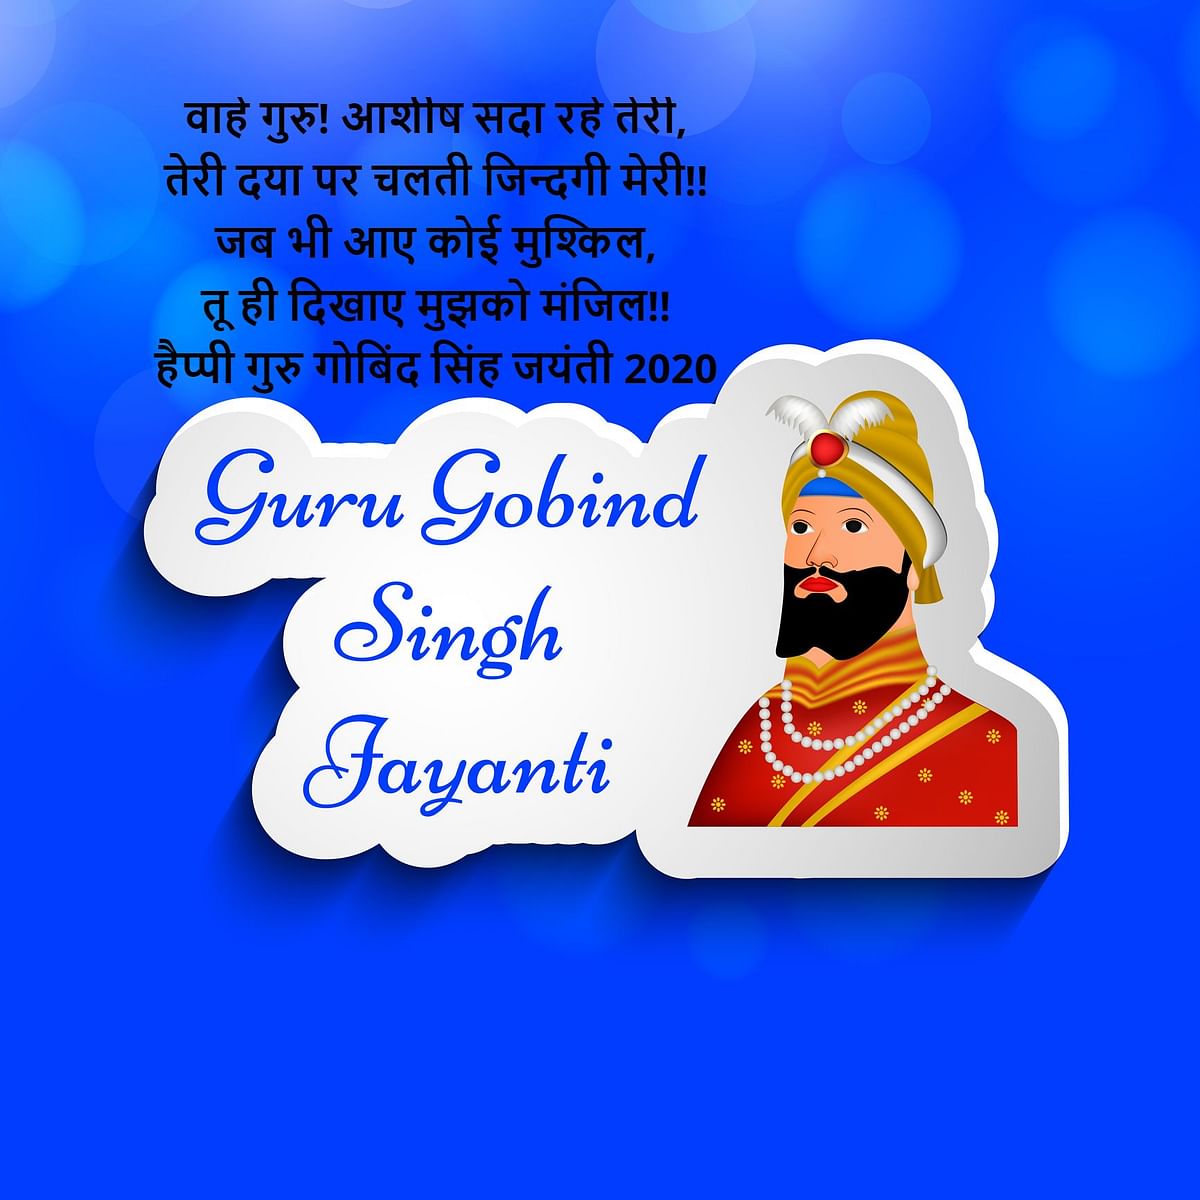 Guru Gobind Singh Jayanti Images, Wishes and Quotes